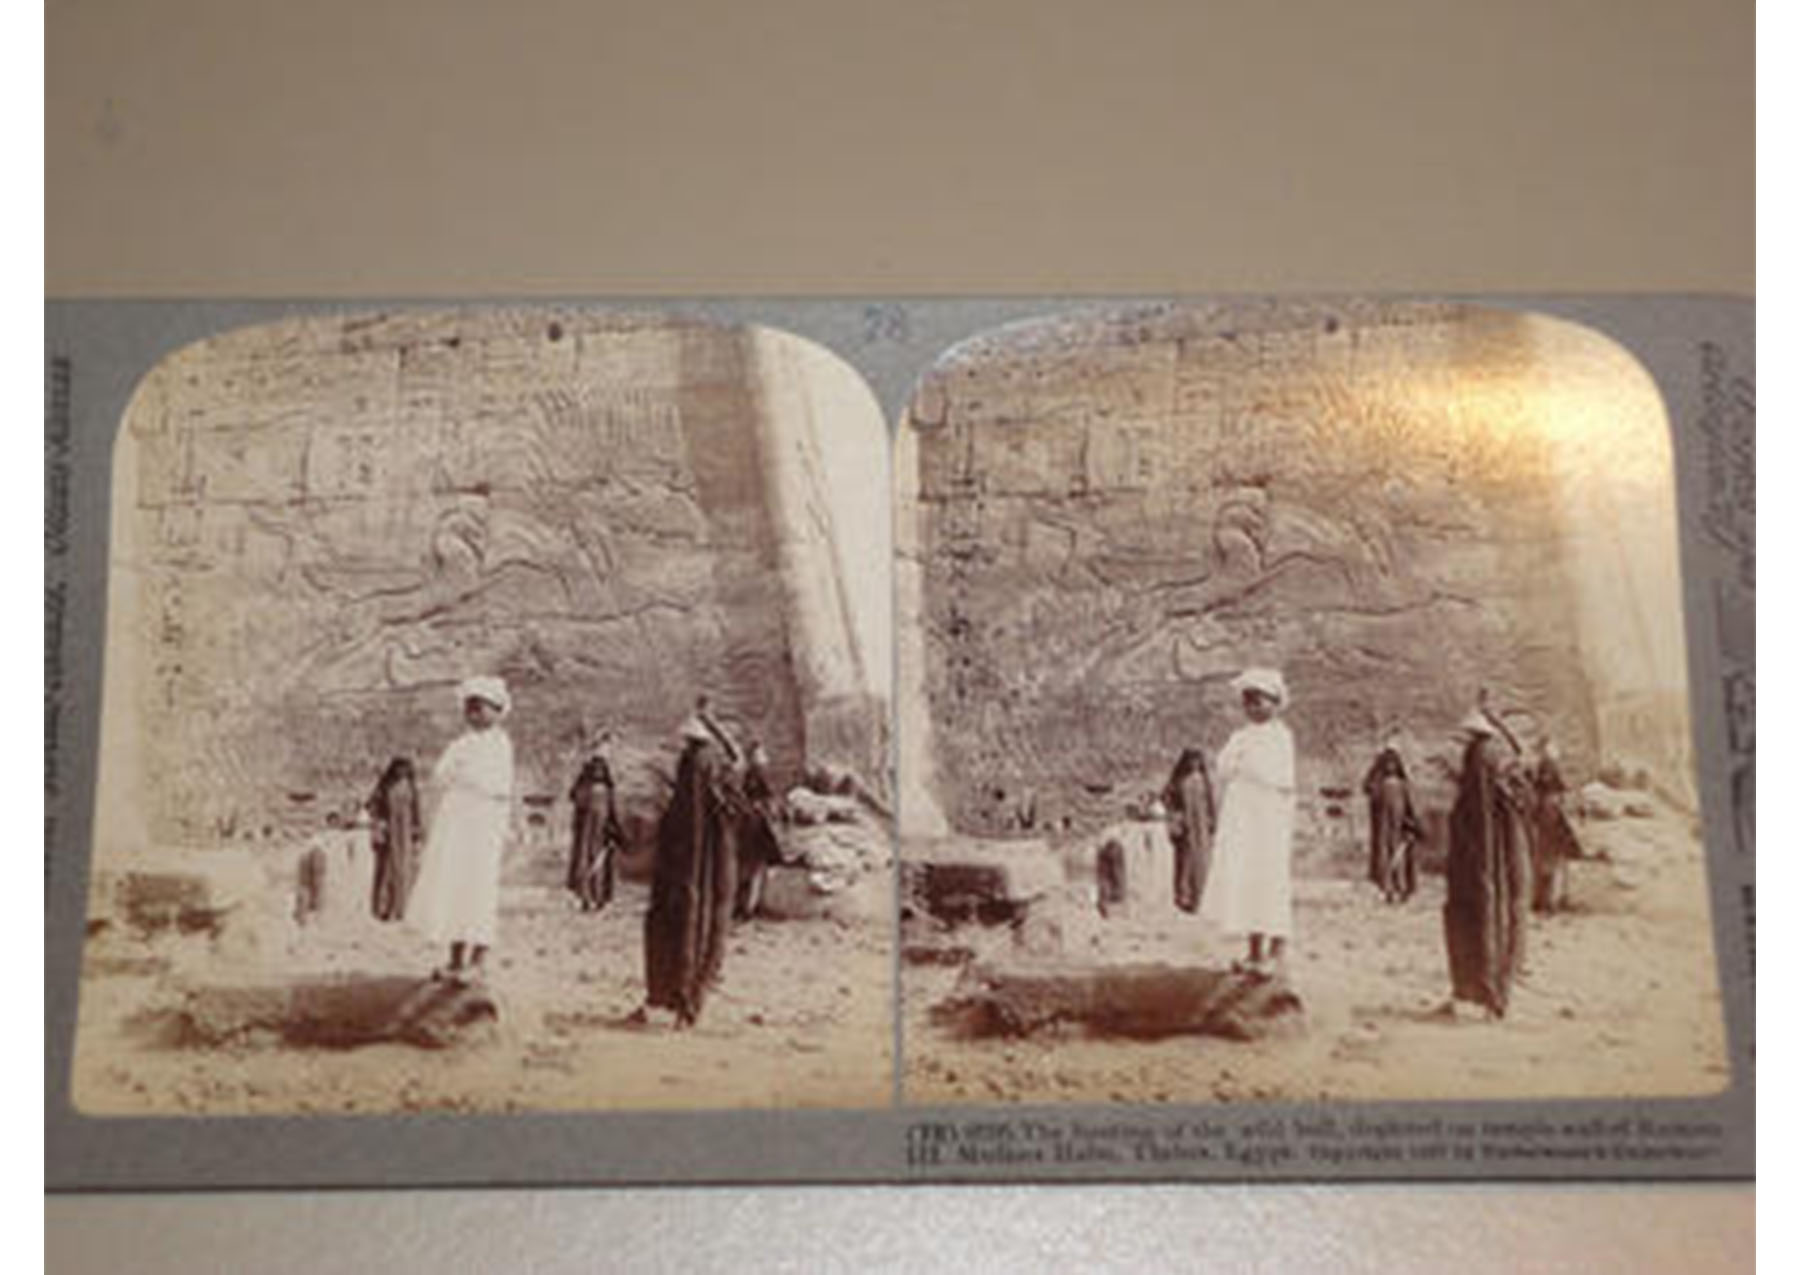 two identical images side by side of people standing in front of an Egyptian tomb